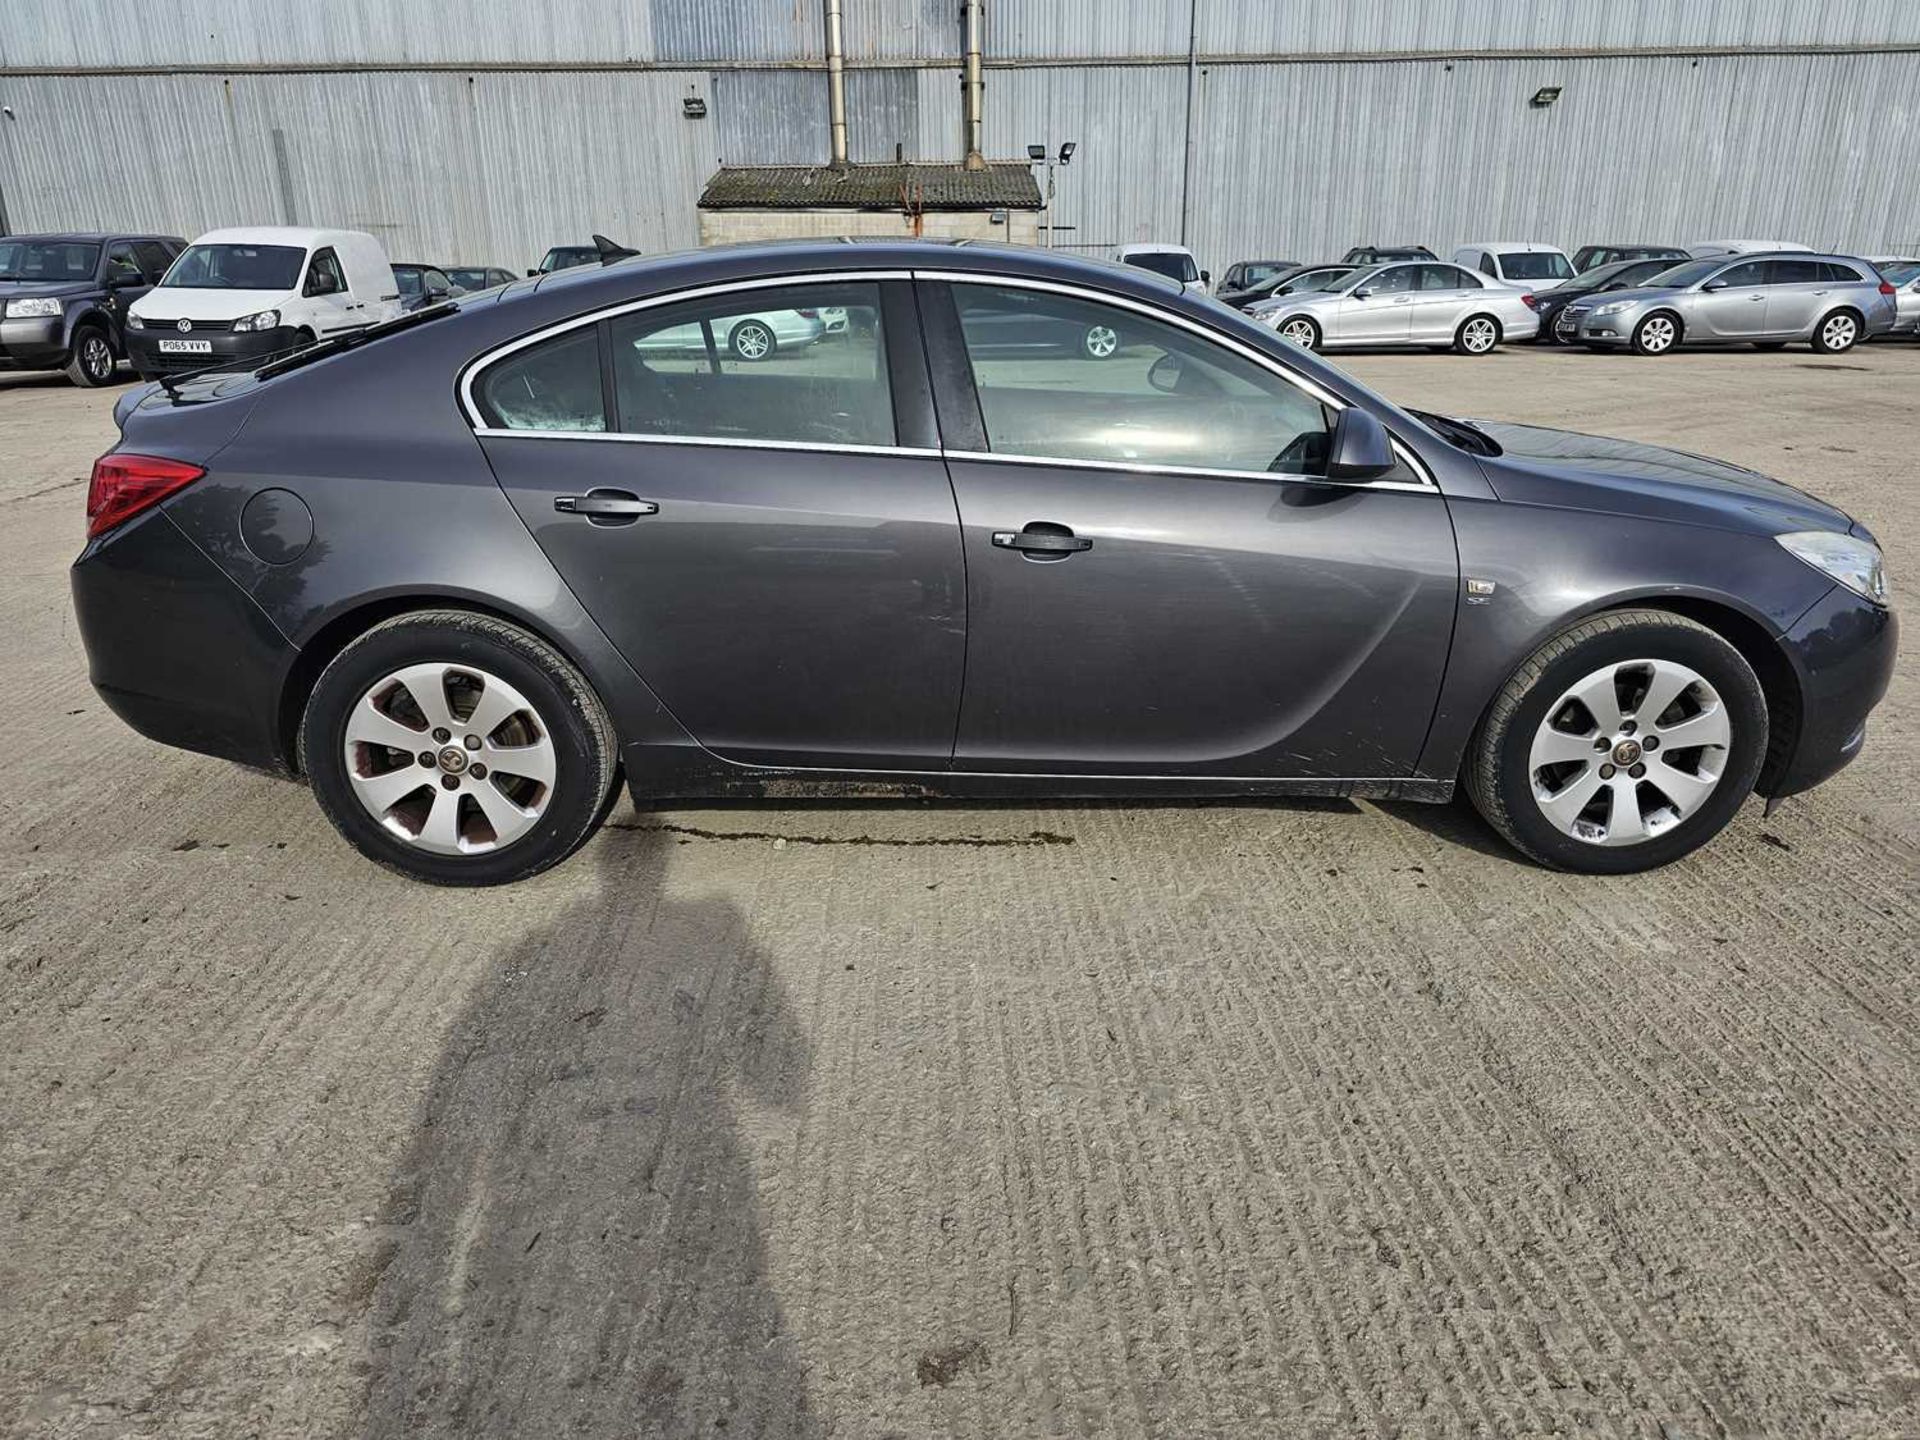 2009 Vauxhall Insignia, 6 Speed, Bluetooth, Cruise Control, Climate Control (Reg. Docs. Available, T - Image 6 of 28